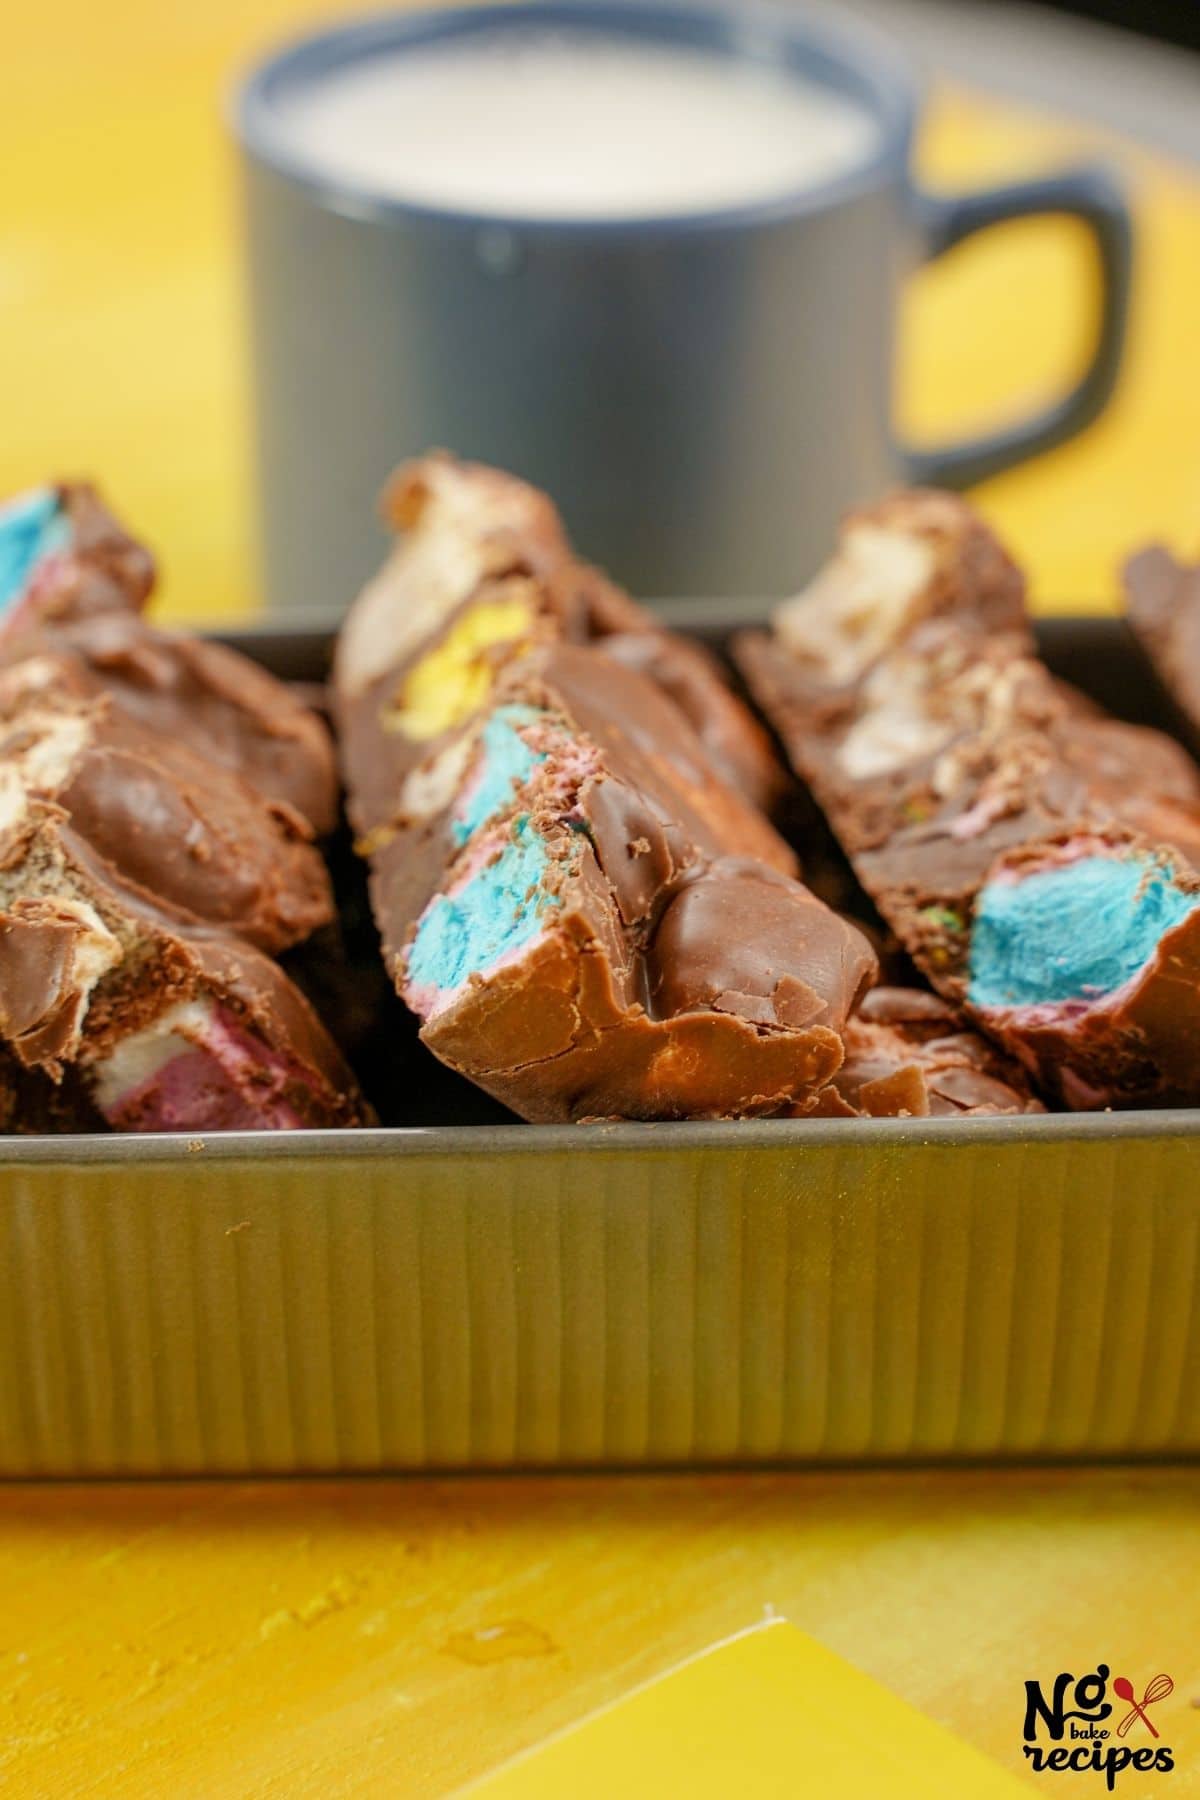 container of rocky road bars on yellow table by mug of milk